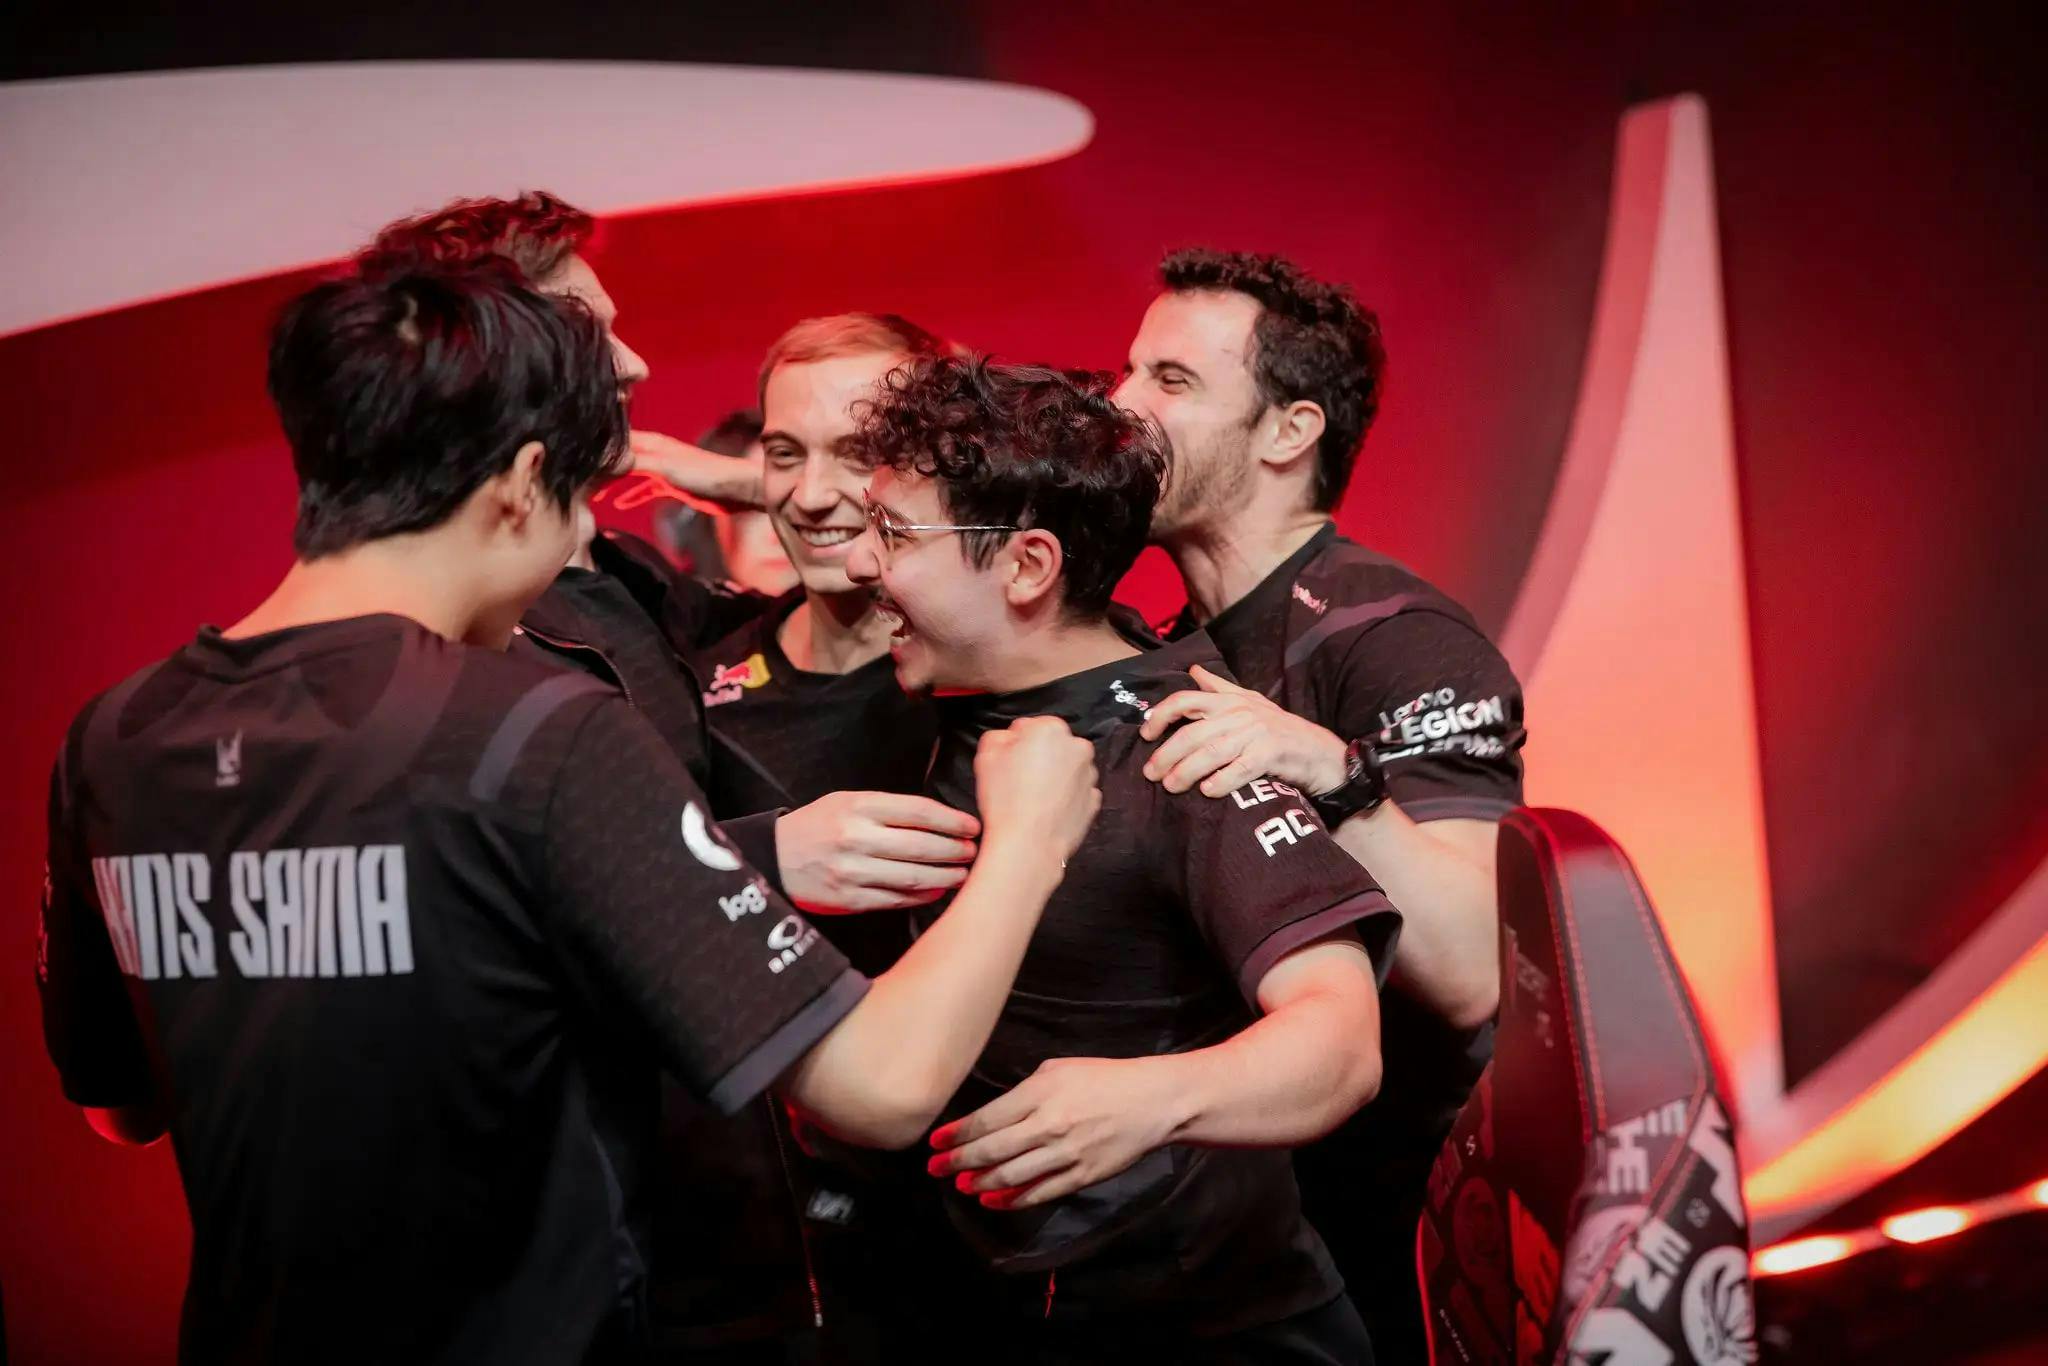 G2, celebrating after beating TES. Credit: Colin Young-Wolff/Riot Games